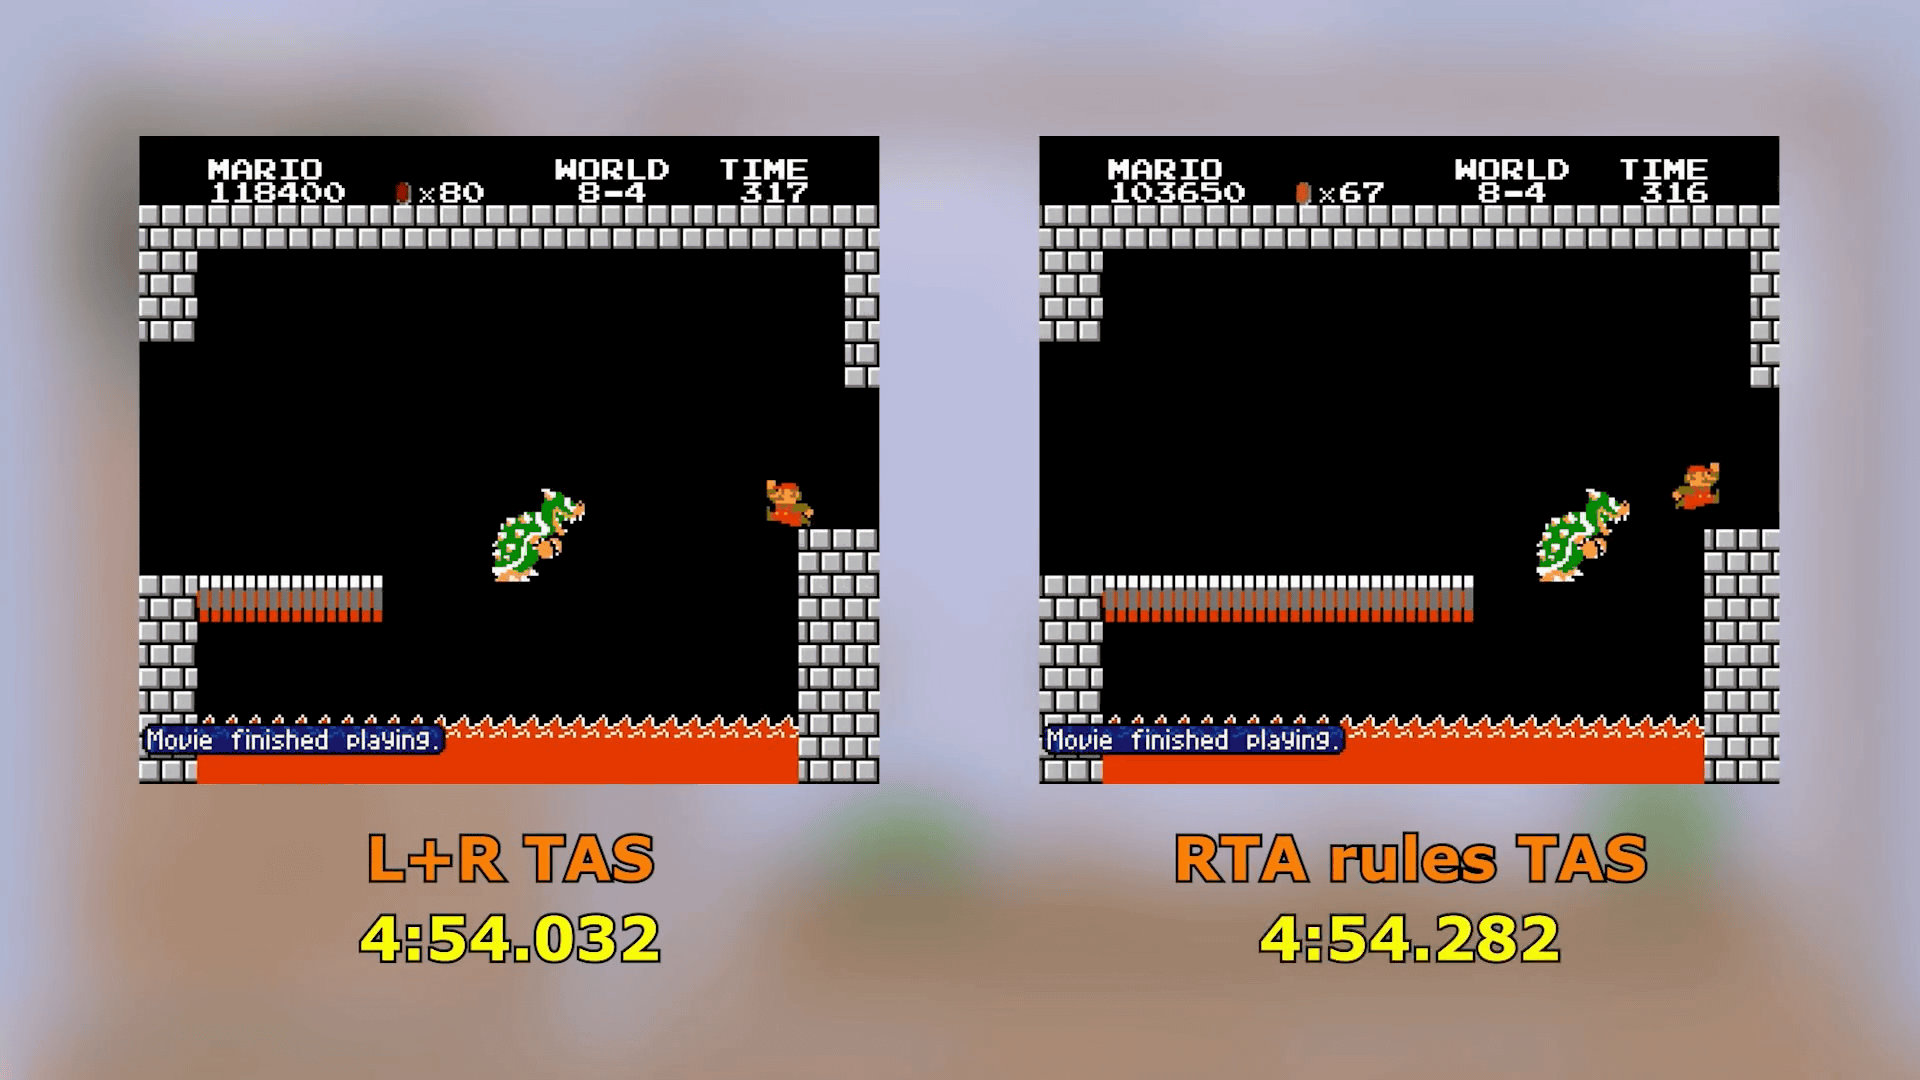 Super Mario Bros Rta World Record Set What Is The Wall Of 4 Minutes 55 Seconds Made Impossible For Humankind Gigazine